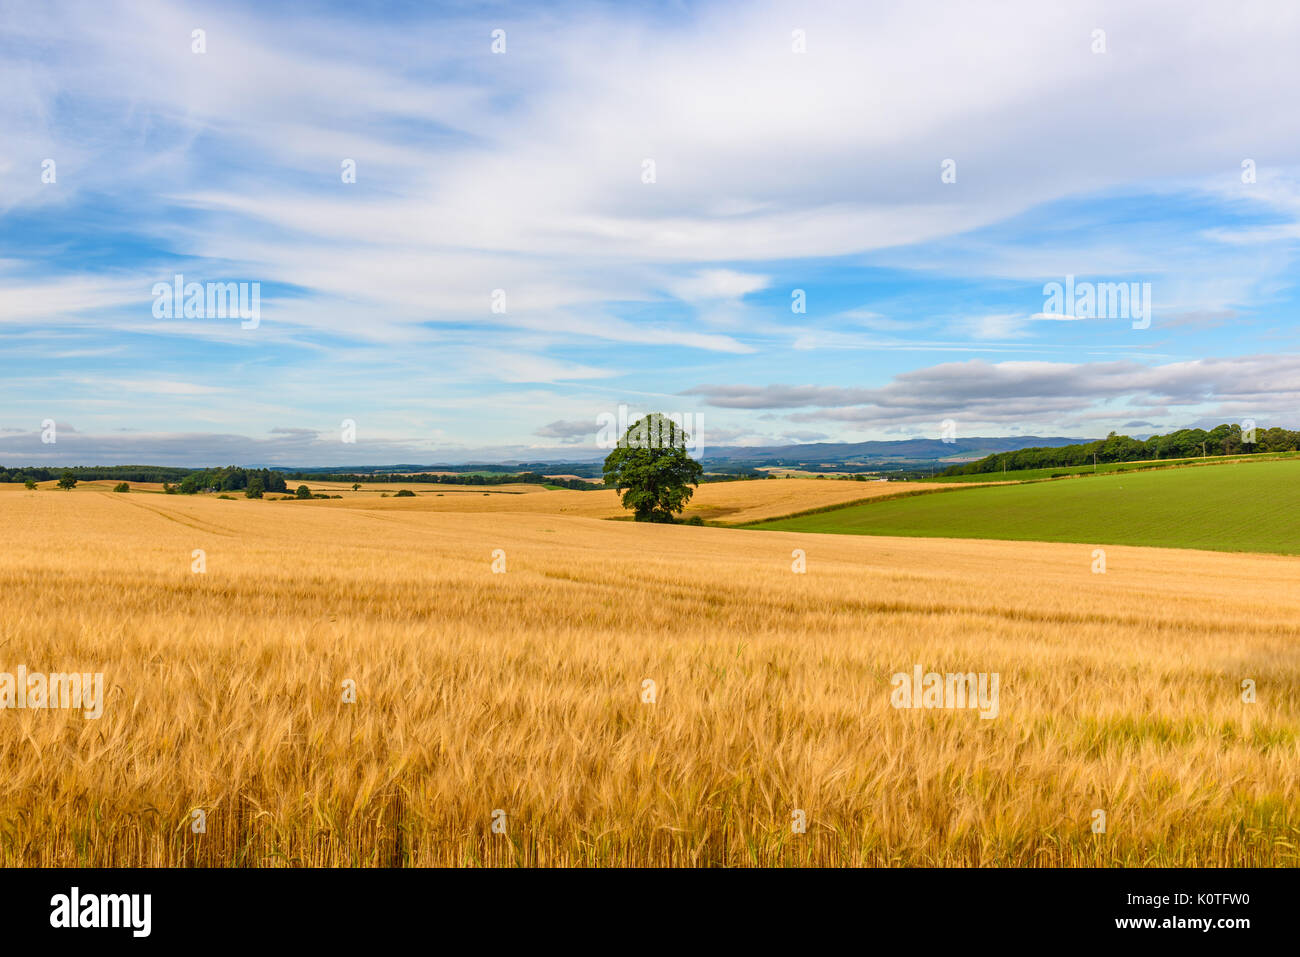 Scenic view of the countryside near Perth in Scotland in summer with a tree in the middle of a mature wheat field. Stock Photo